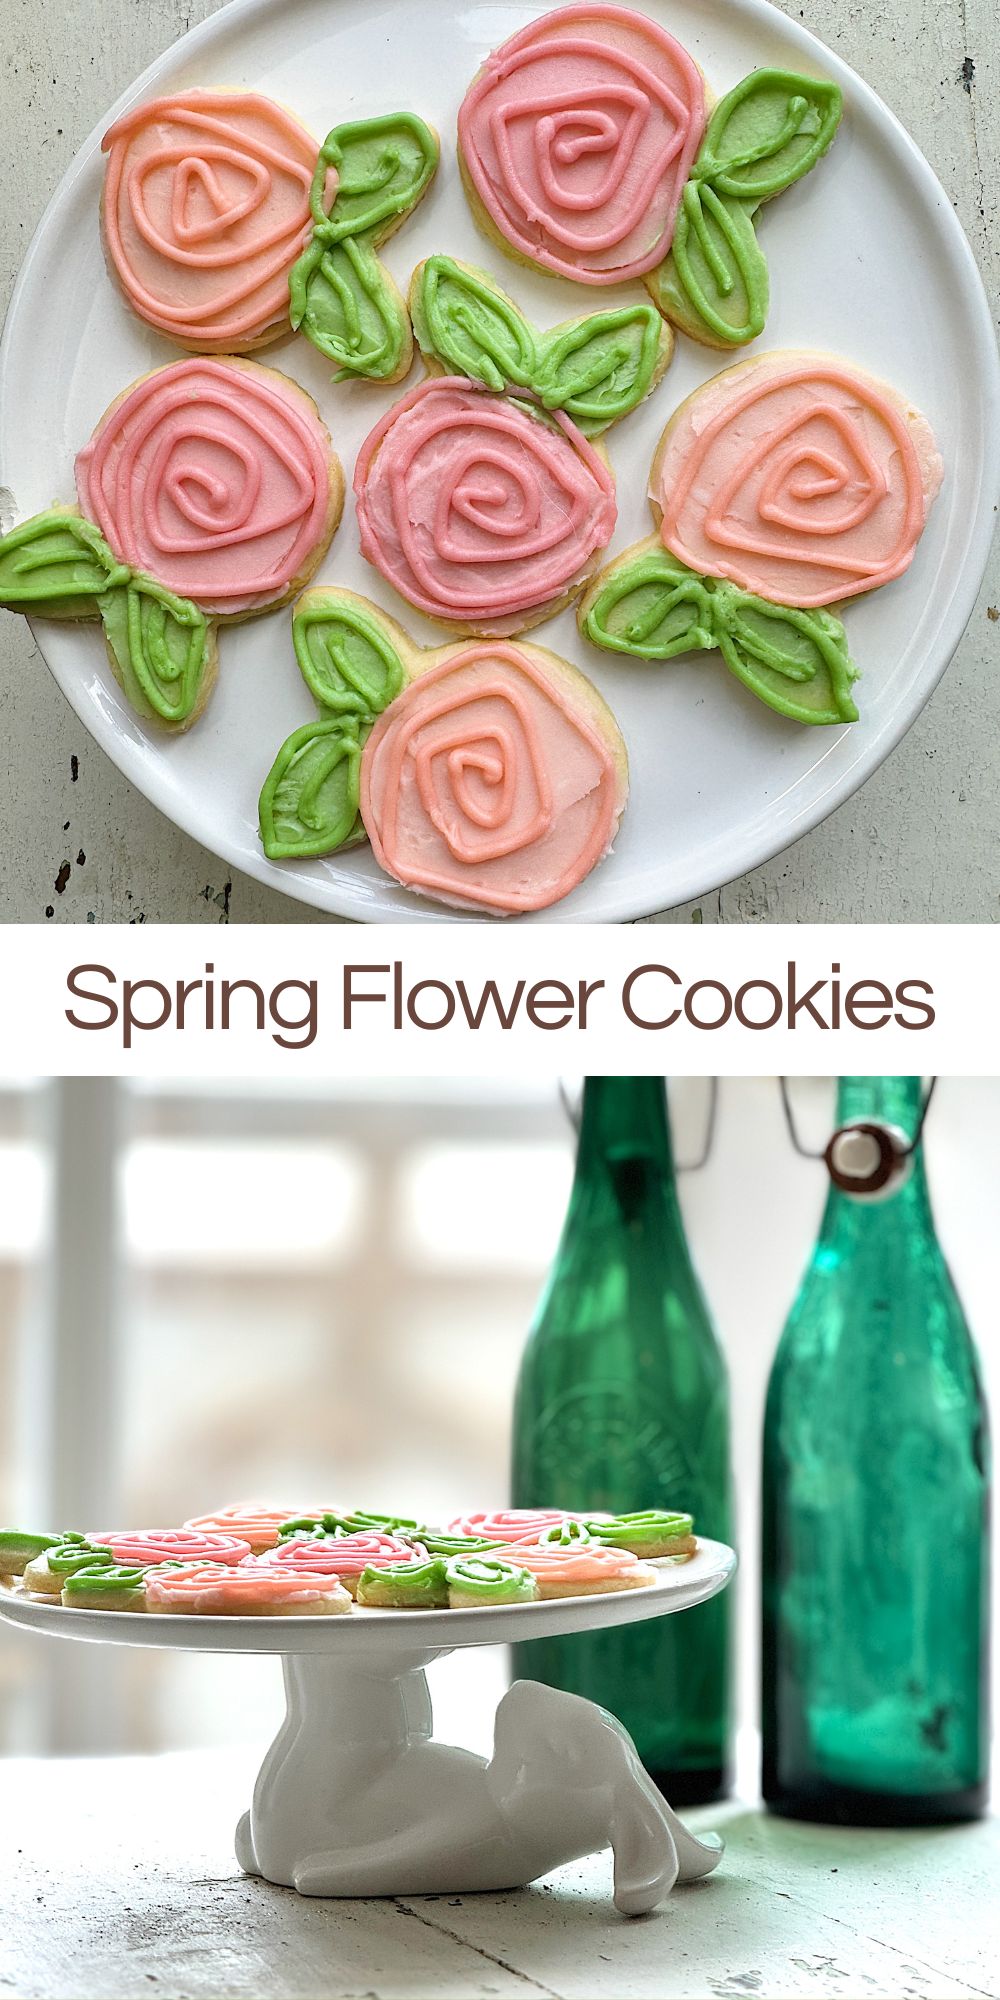 There's no better way to enjoy a day than with a batch of delicious and beautifully decorated spring flower cookies. 